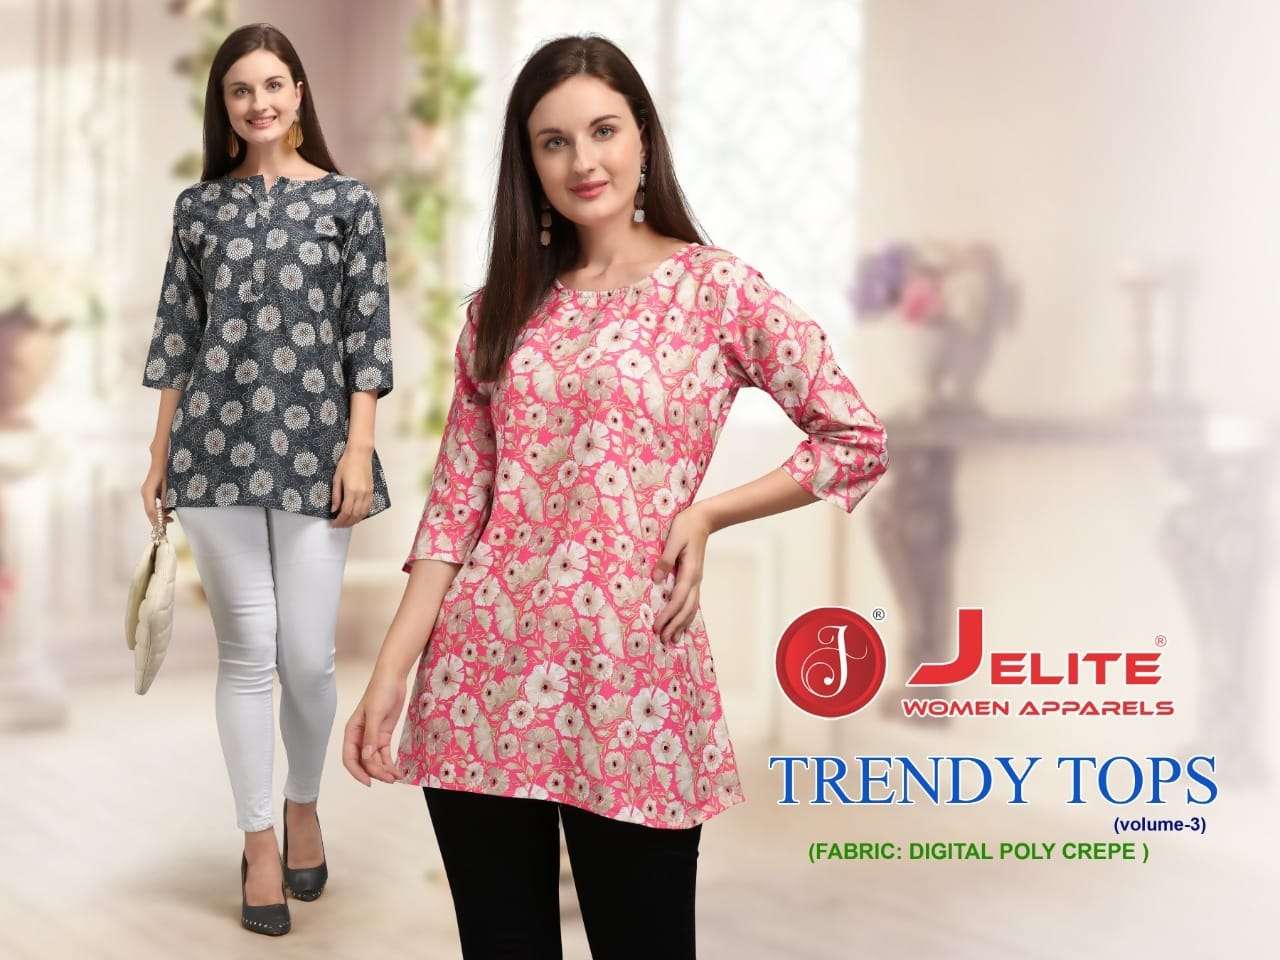 Trendy Top 3 Short Tops By Jelite With Cotton Digital Print